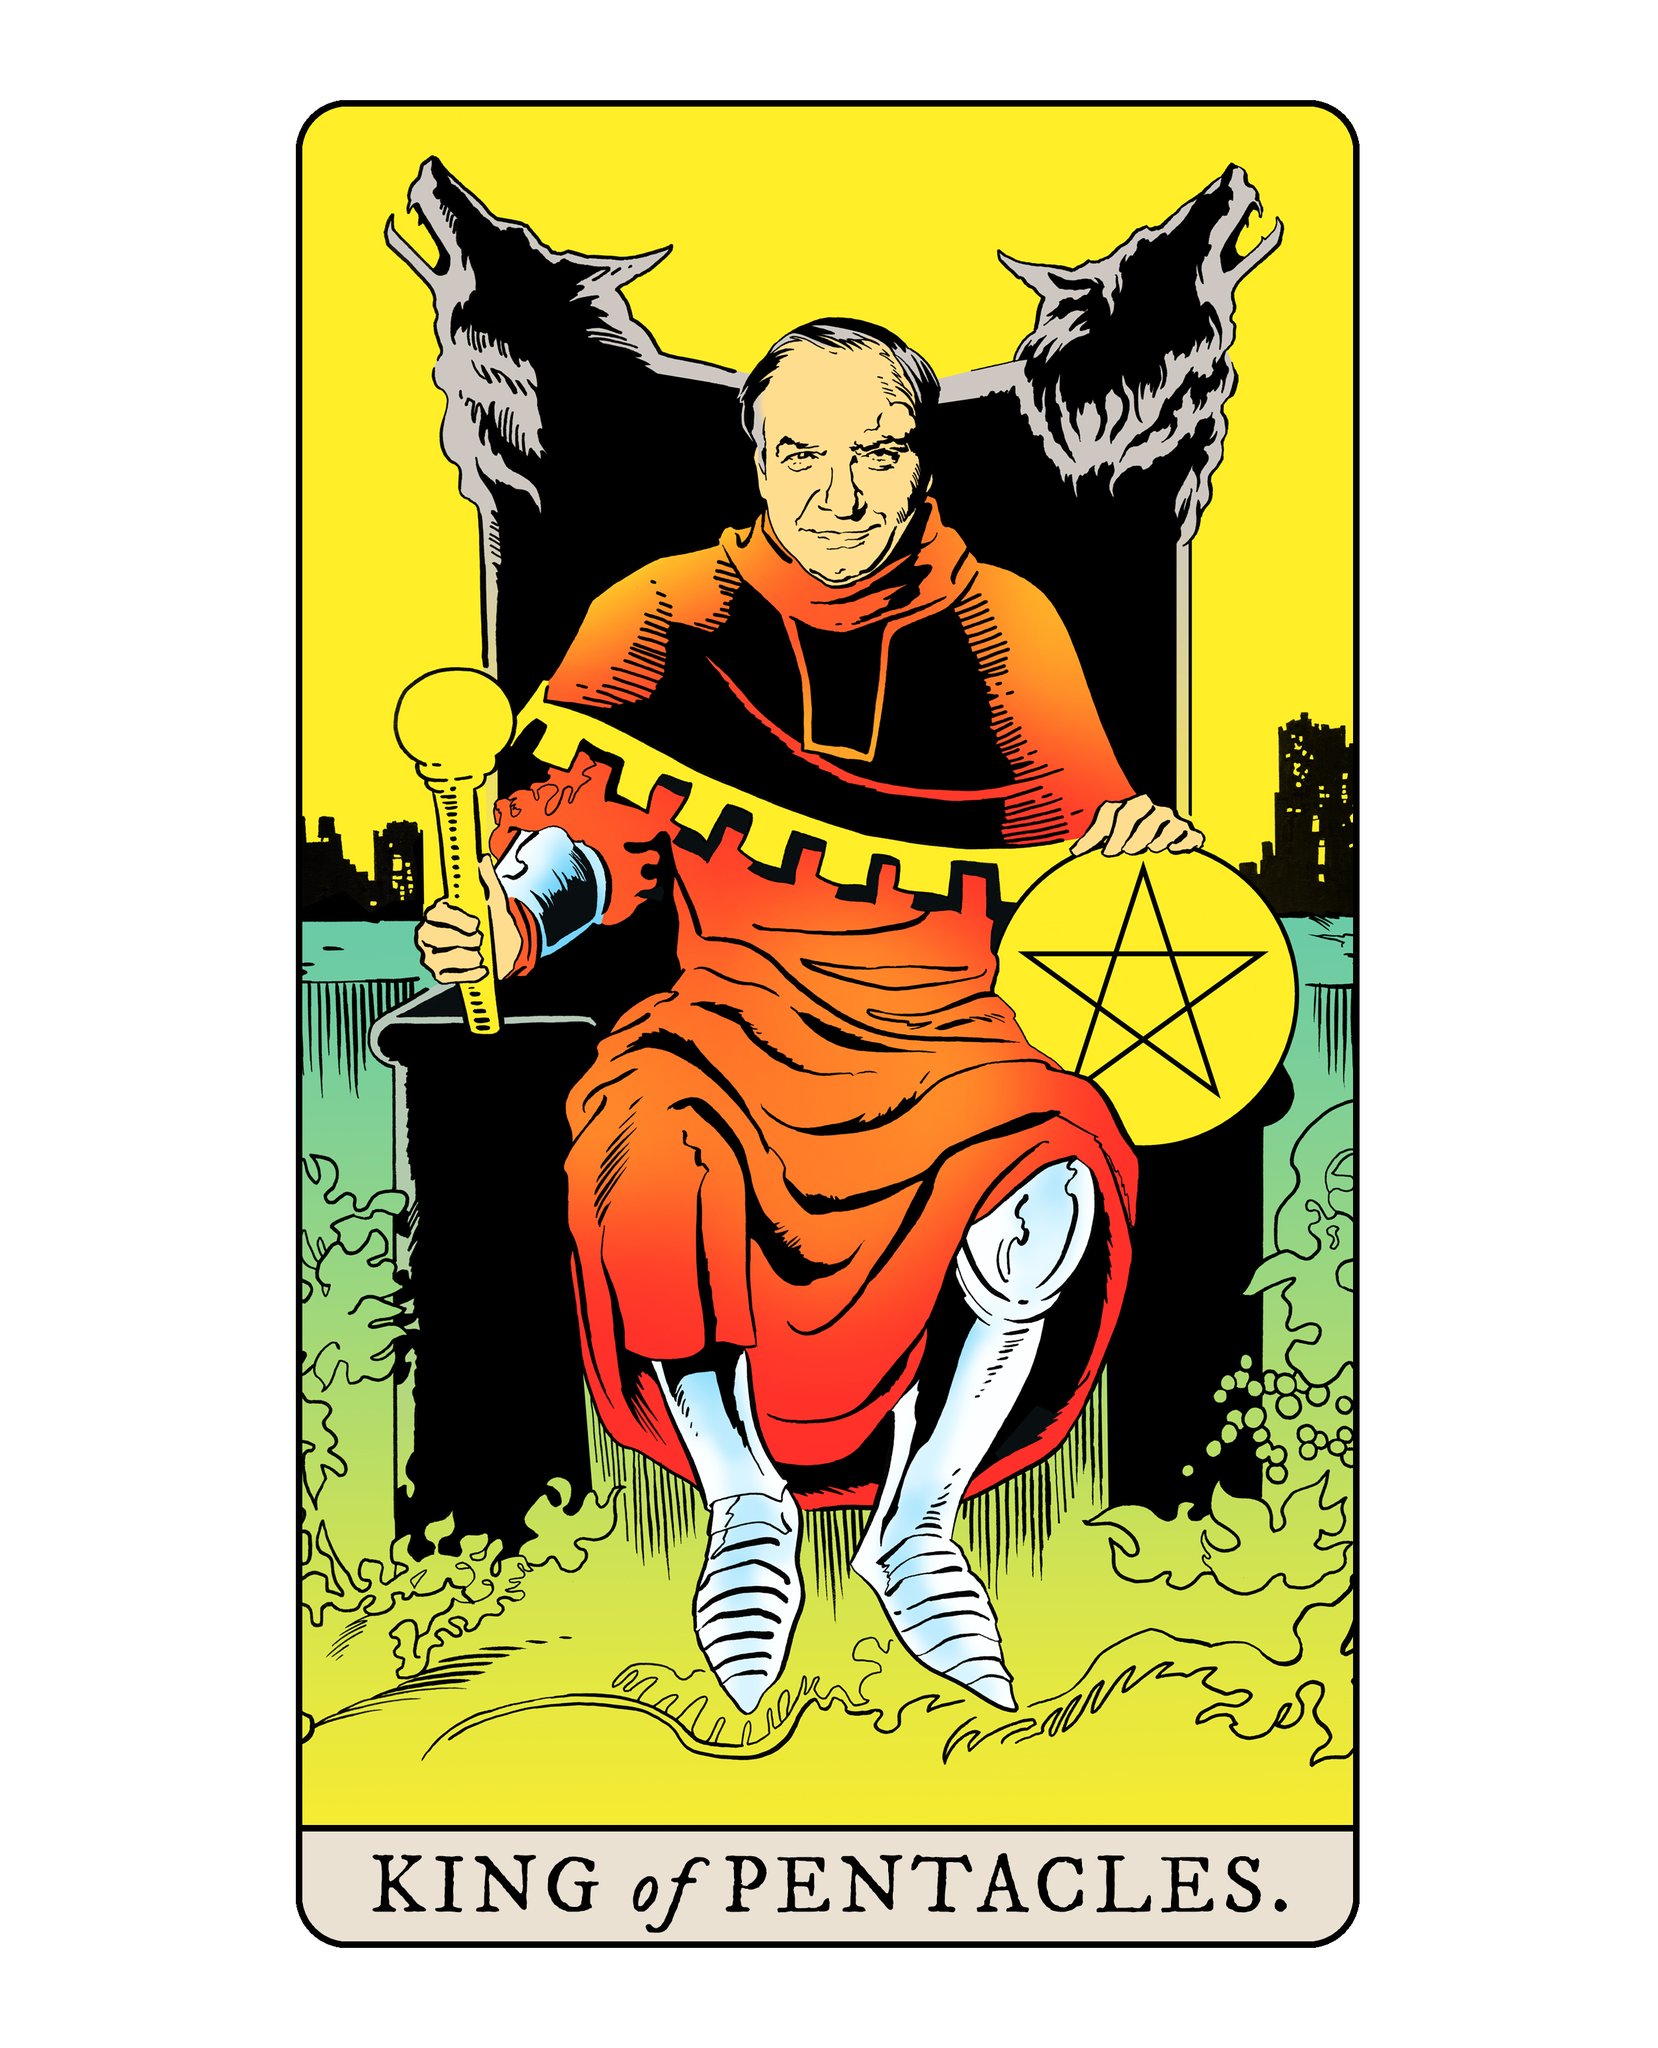 Happy Birthday to the King of Pentacles, Dick Wolf.  